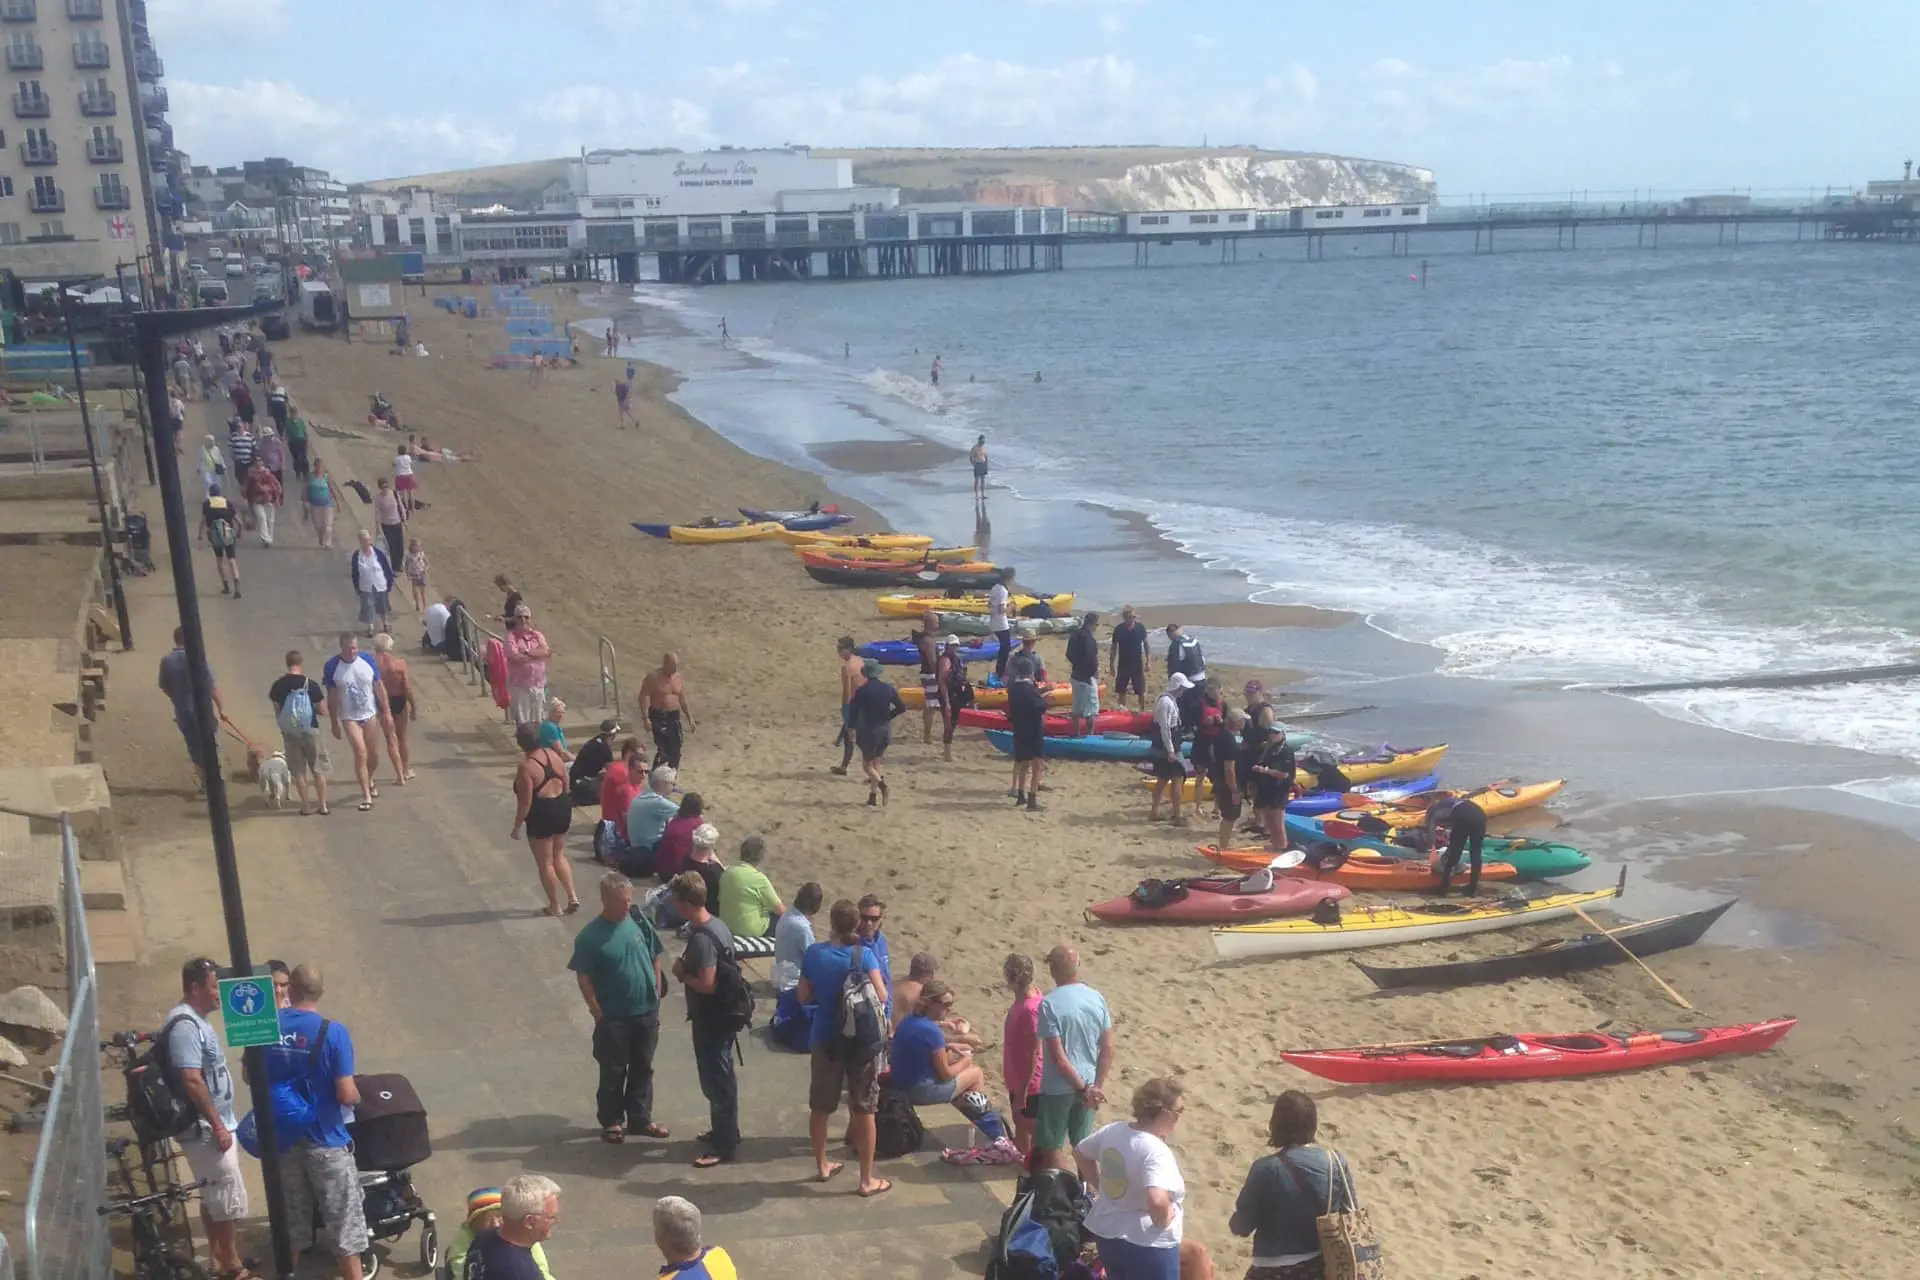 kayakers and canoeists getting ready for the Pier to Pier Swim